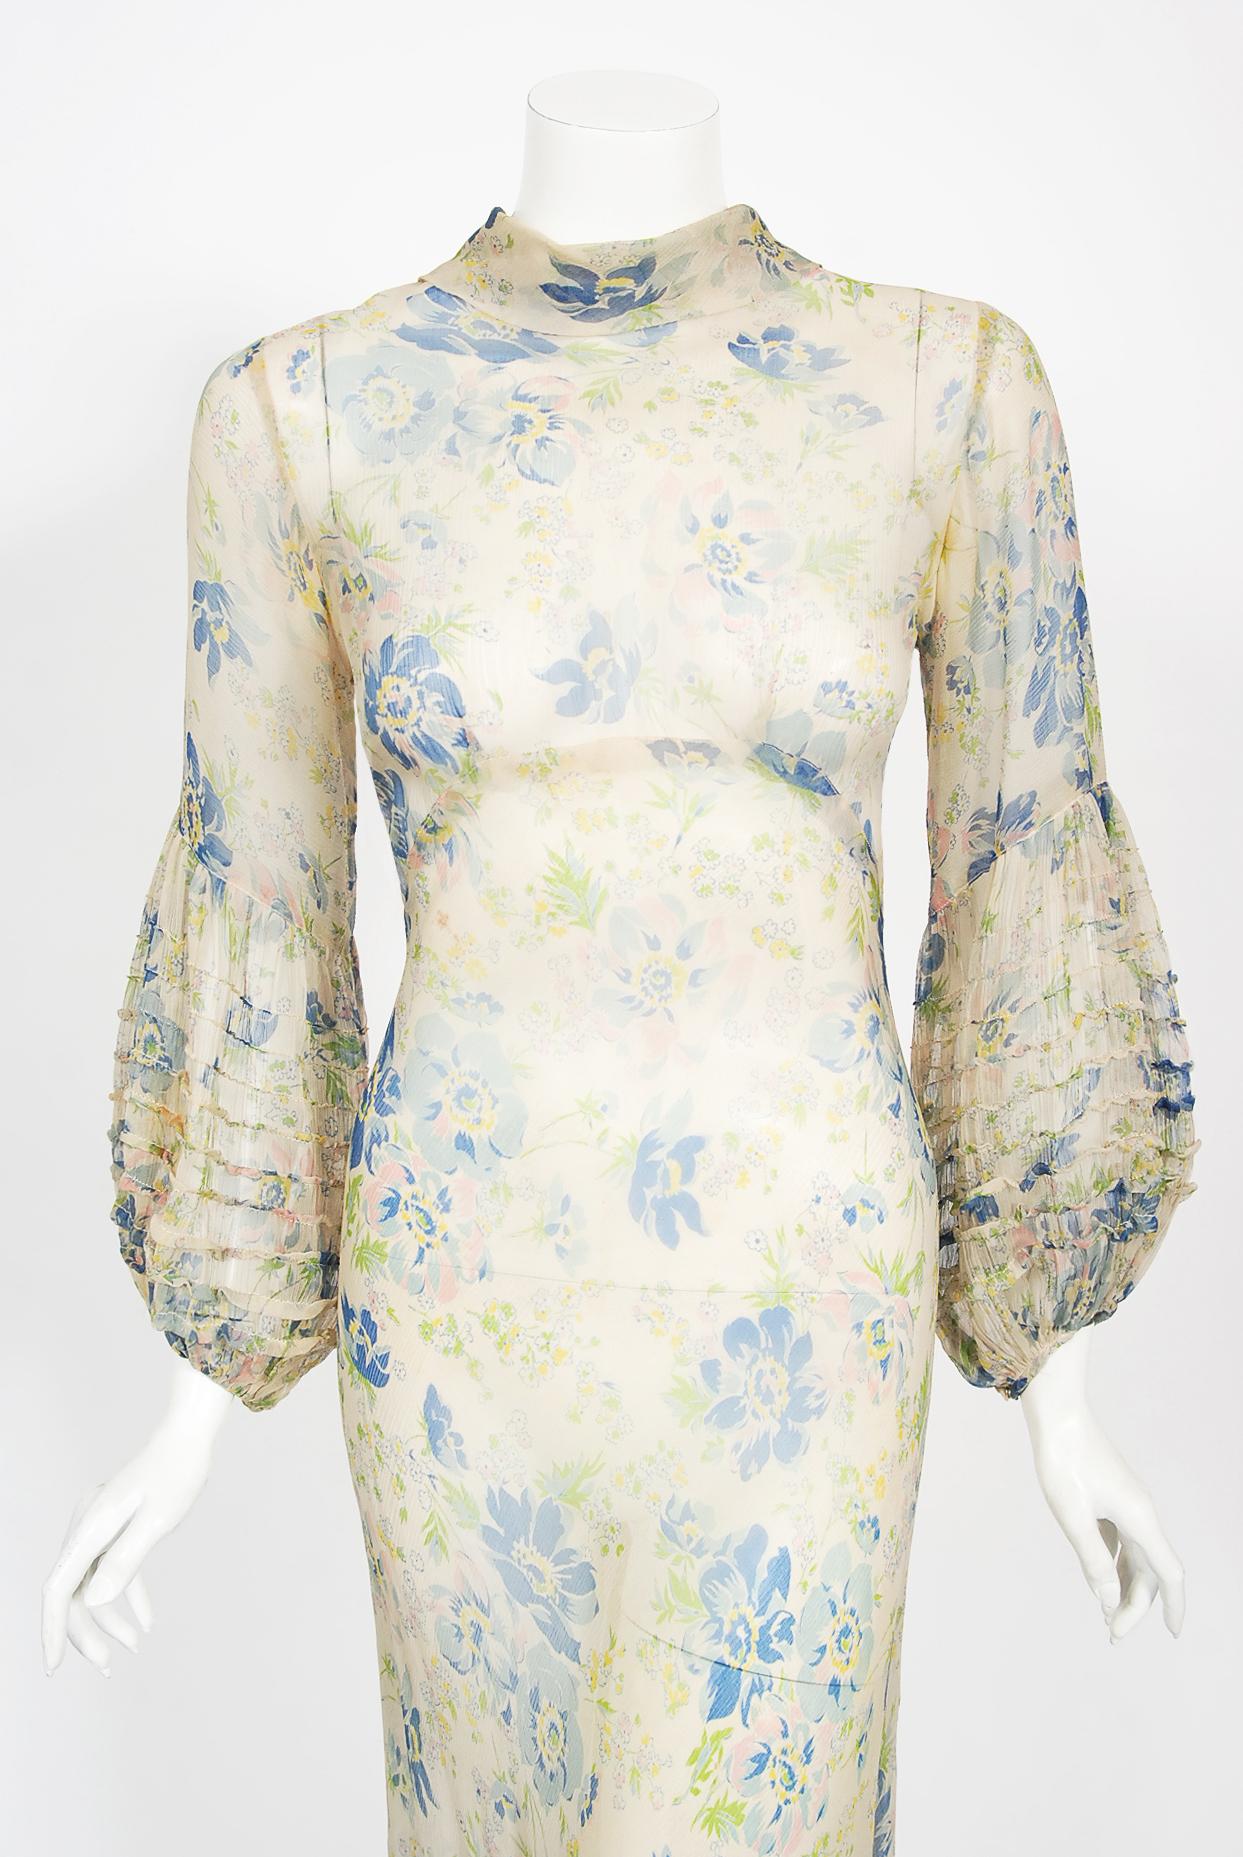 The ethereal floral garden print used on this 1930's sheer ivory silk chiffon gown has a fresh innocence that I find irresistible. The bodice has a sculpted high-neck with dramatic pintuck billow sleeves. The garment can also work backwards so we